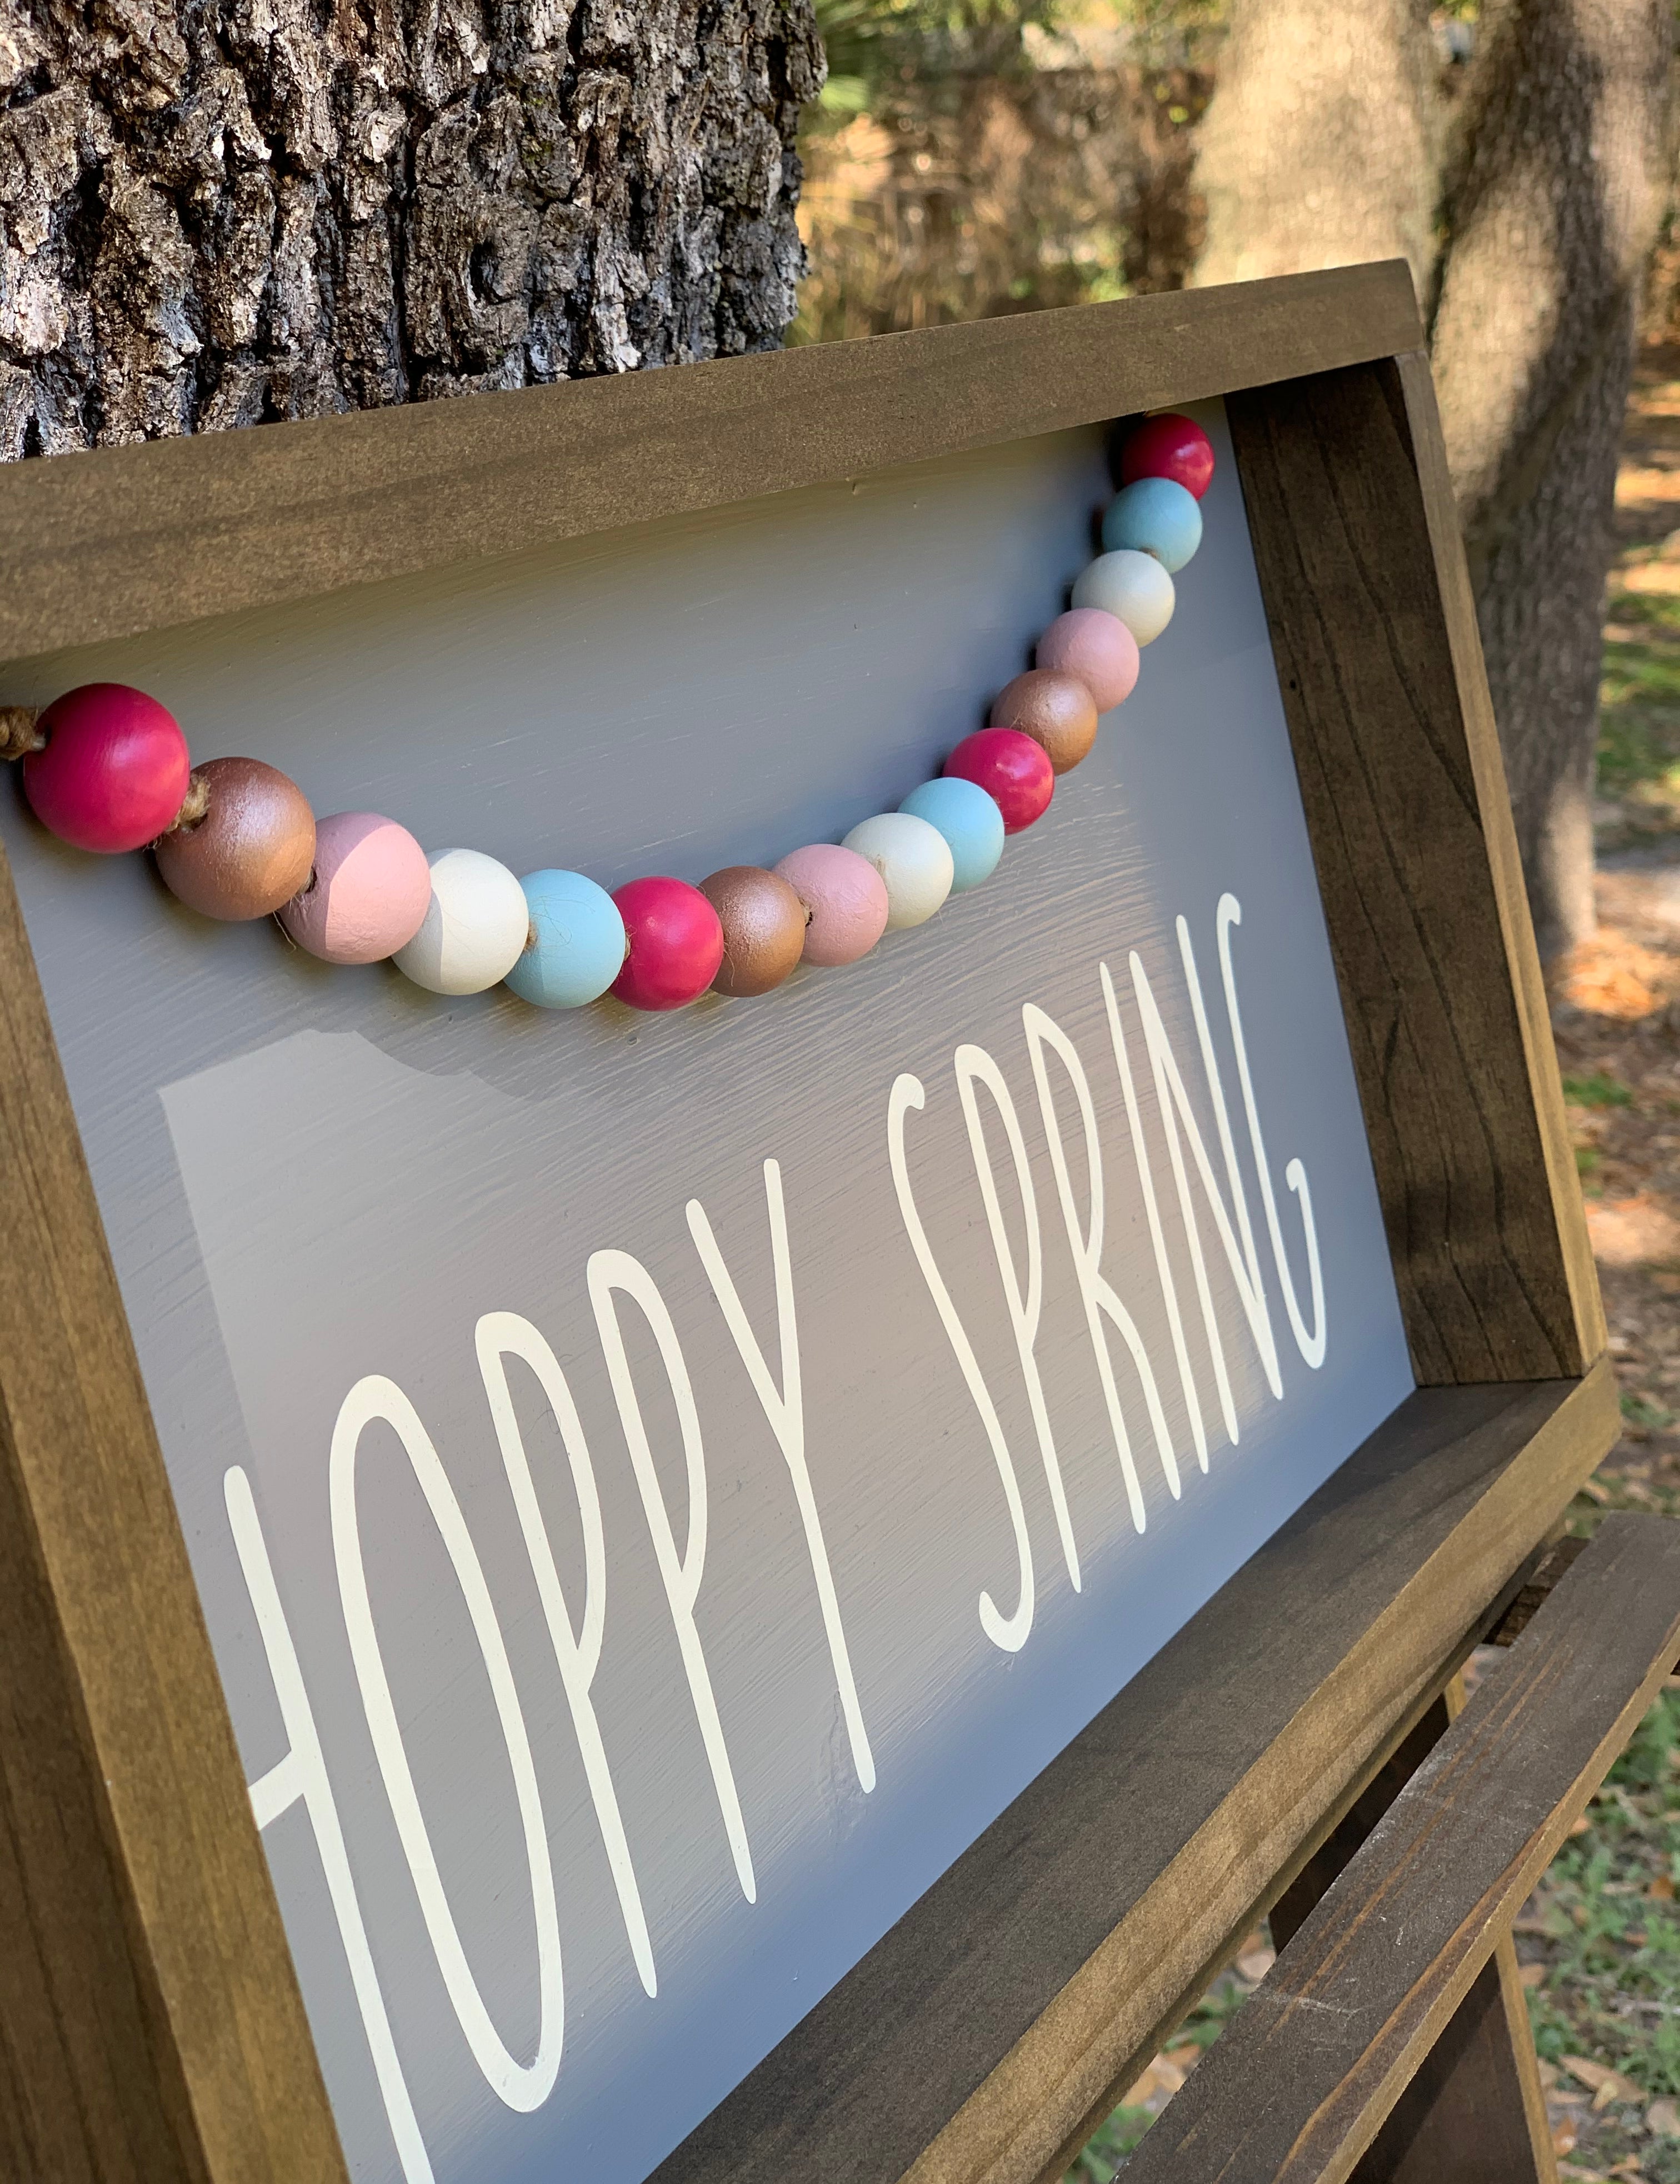 Hoppy Spring (March 2020 Design of the Month) is shown with an altered angle and a close up of the wooden beads.